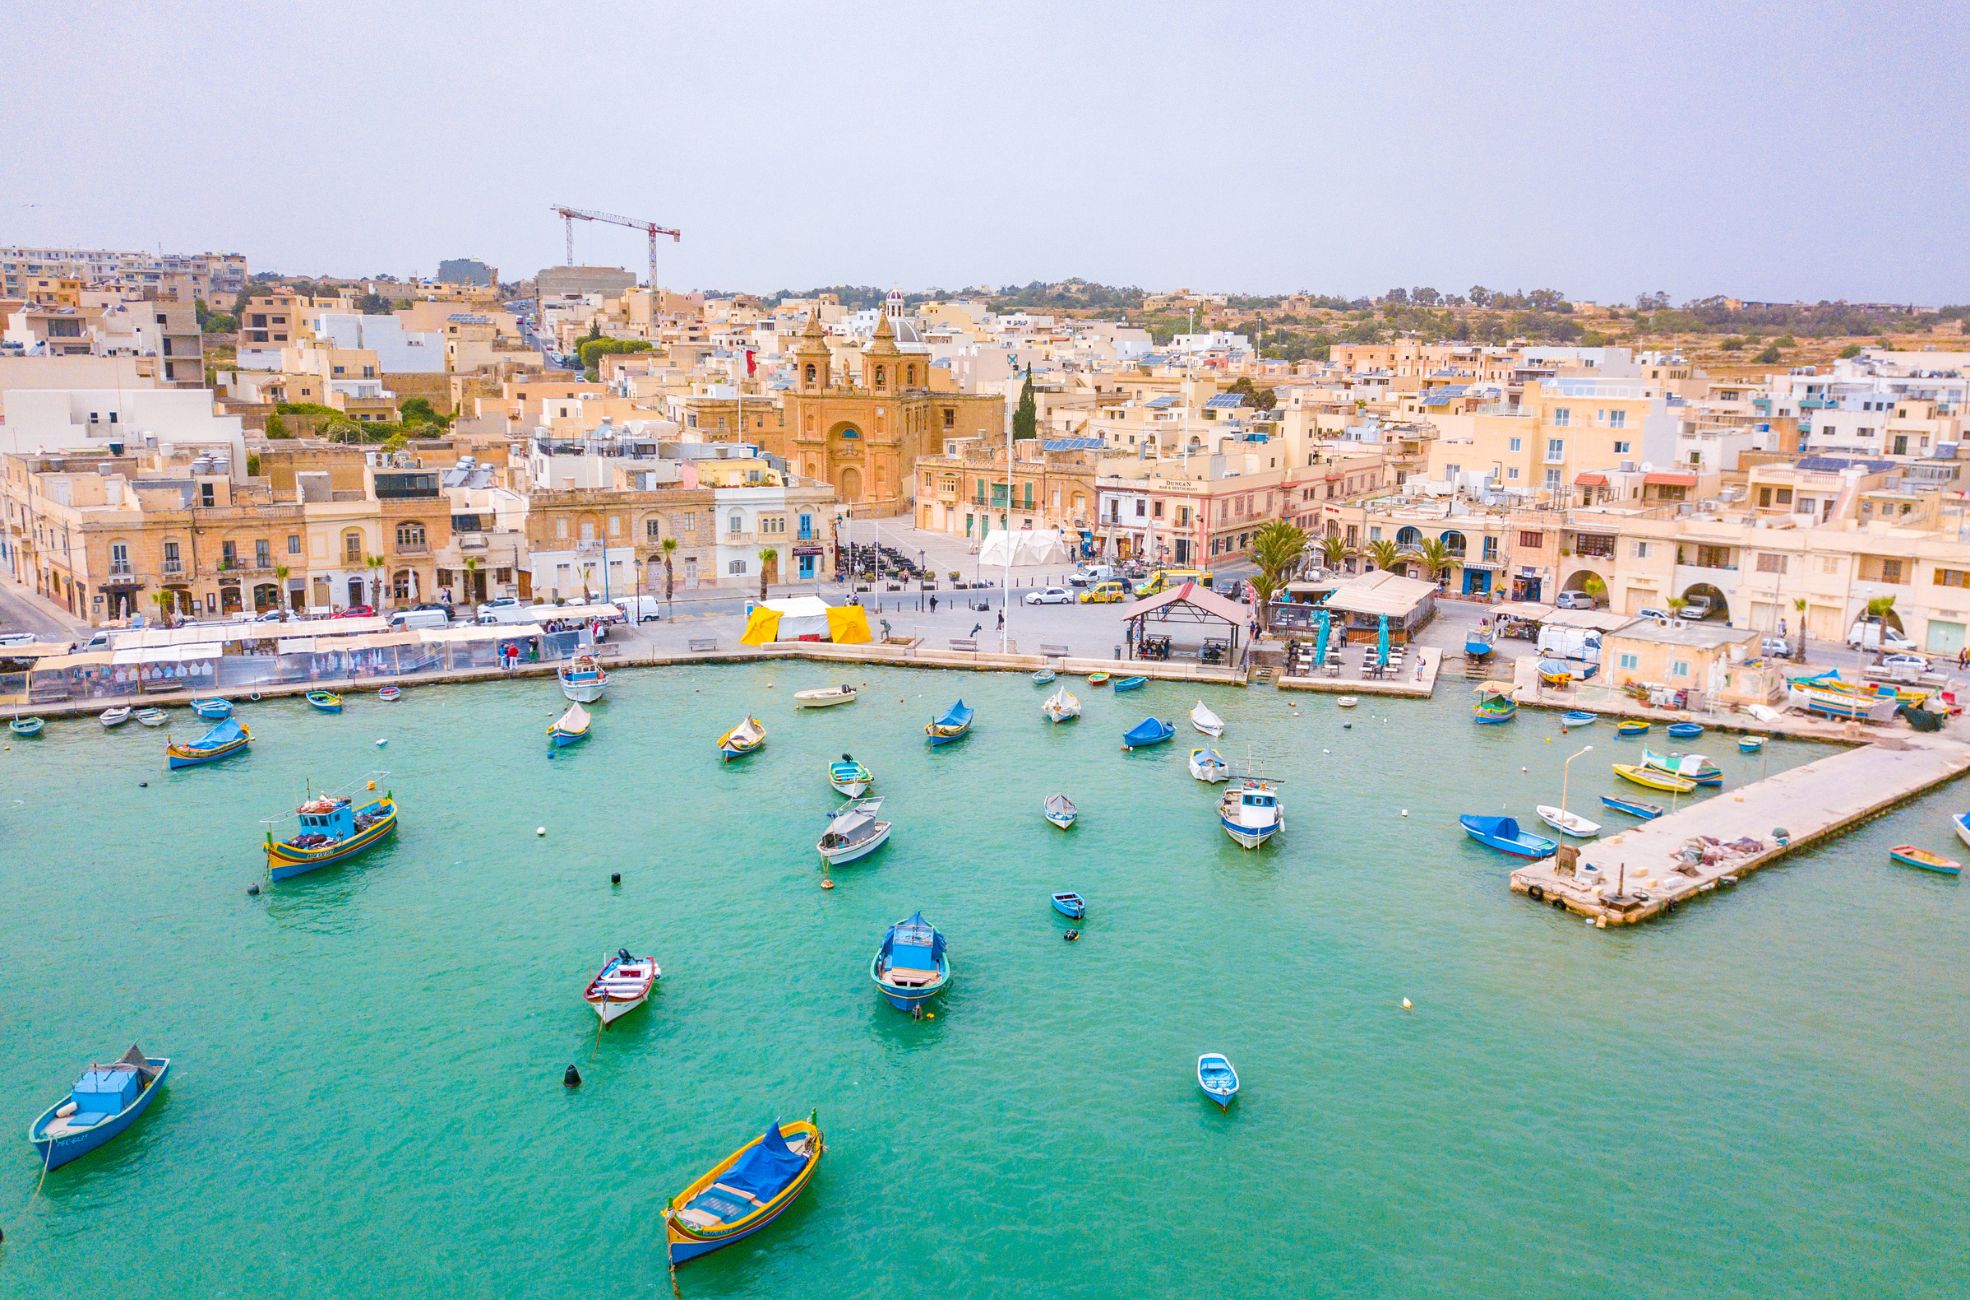 Waterway, Boats And Housing In Malta